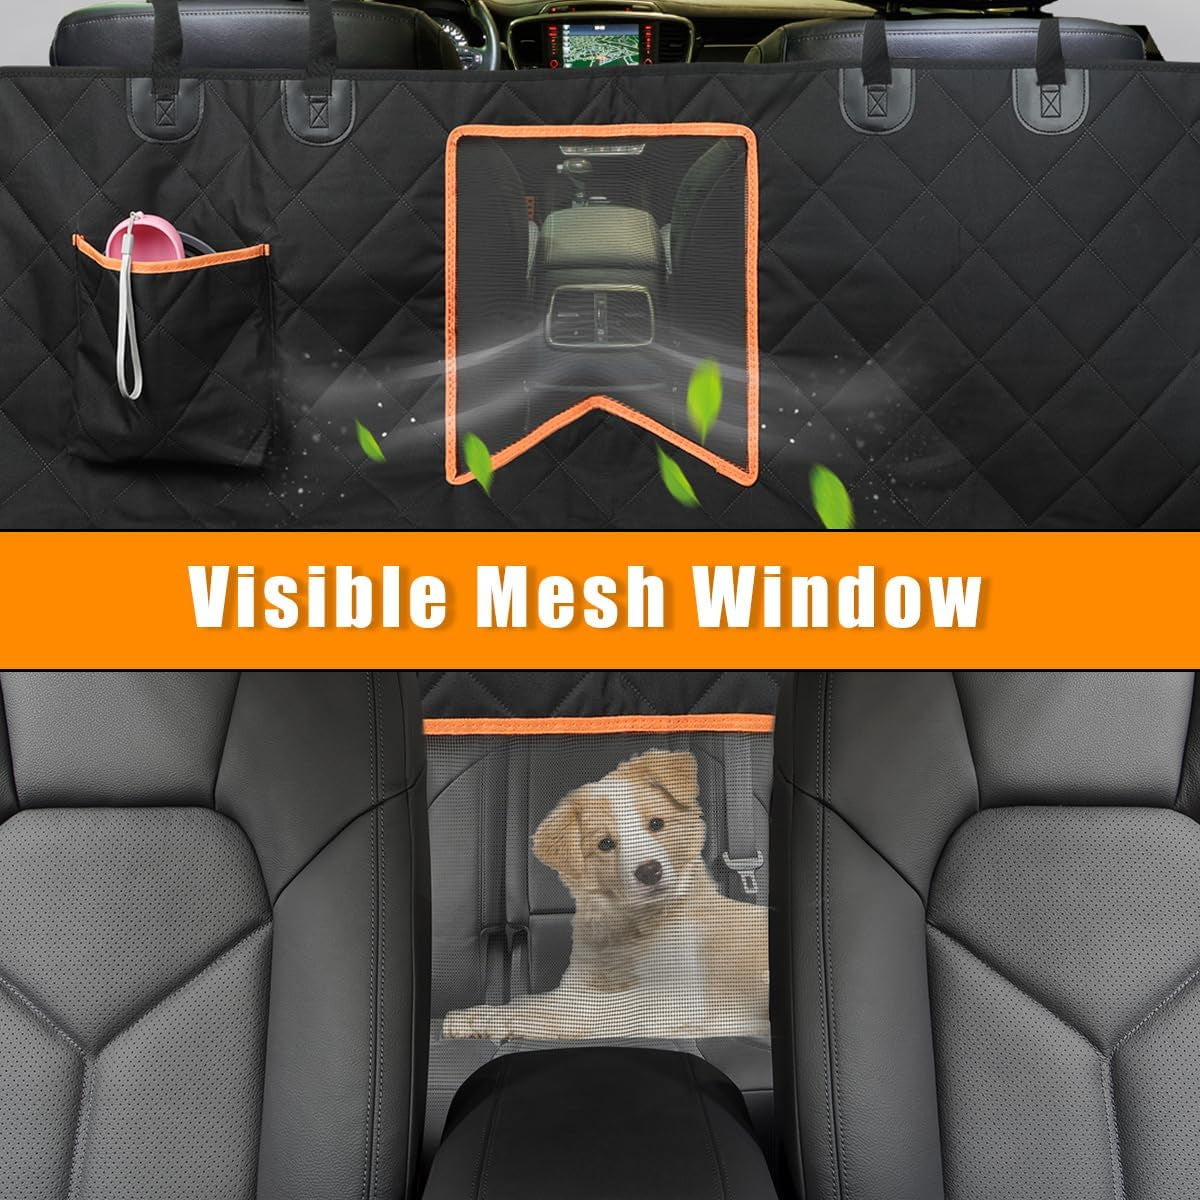 Dog Car Seat Cover for Back Seat, 100% Waterproof Dog Car Hammock with Mesh Window, Anti-Scratch Nonslip Durable Soft Pet Dog Seat Cover for Cars Trucks and SUV